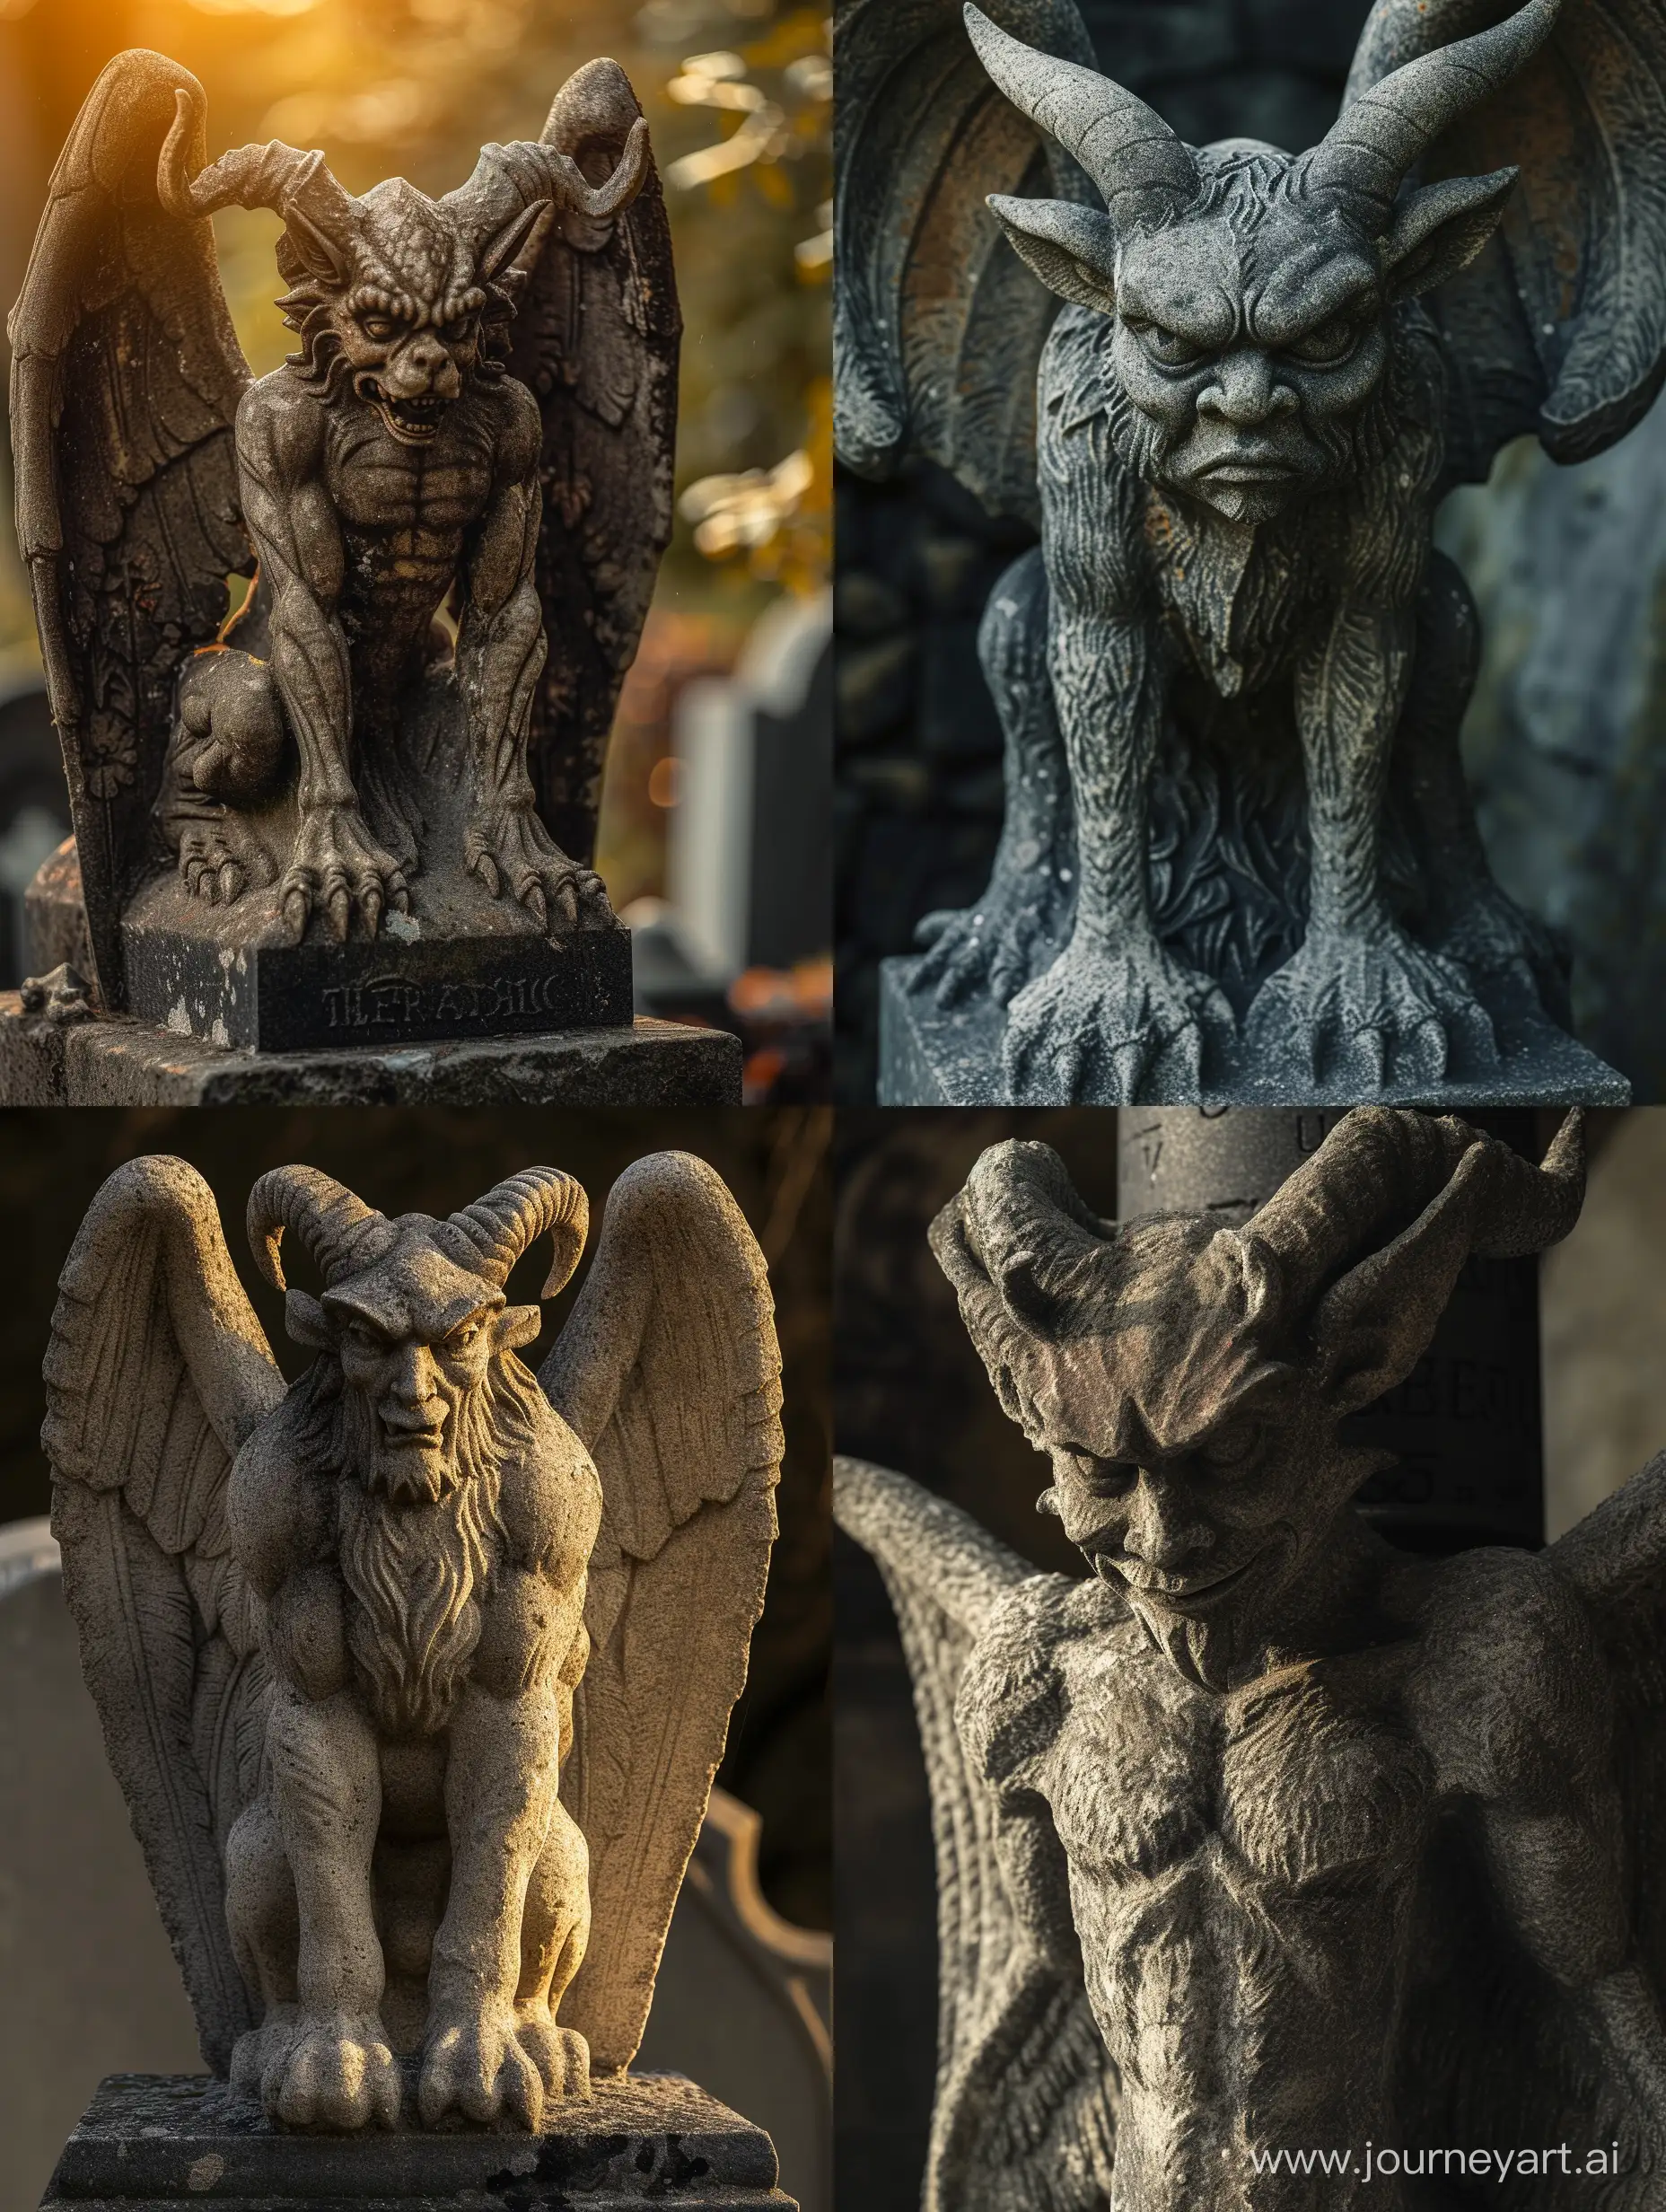 Ethereal-Mythical-Creature-Guardian-Detailed-Stone-Statue-in-Cemetery